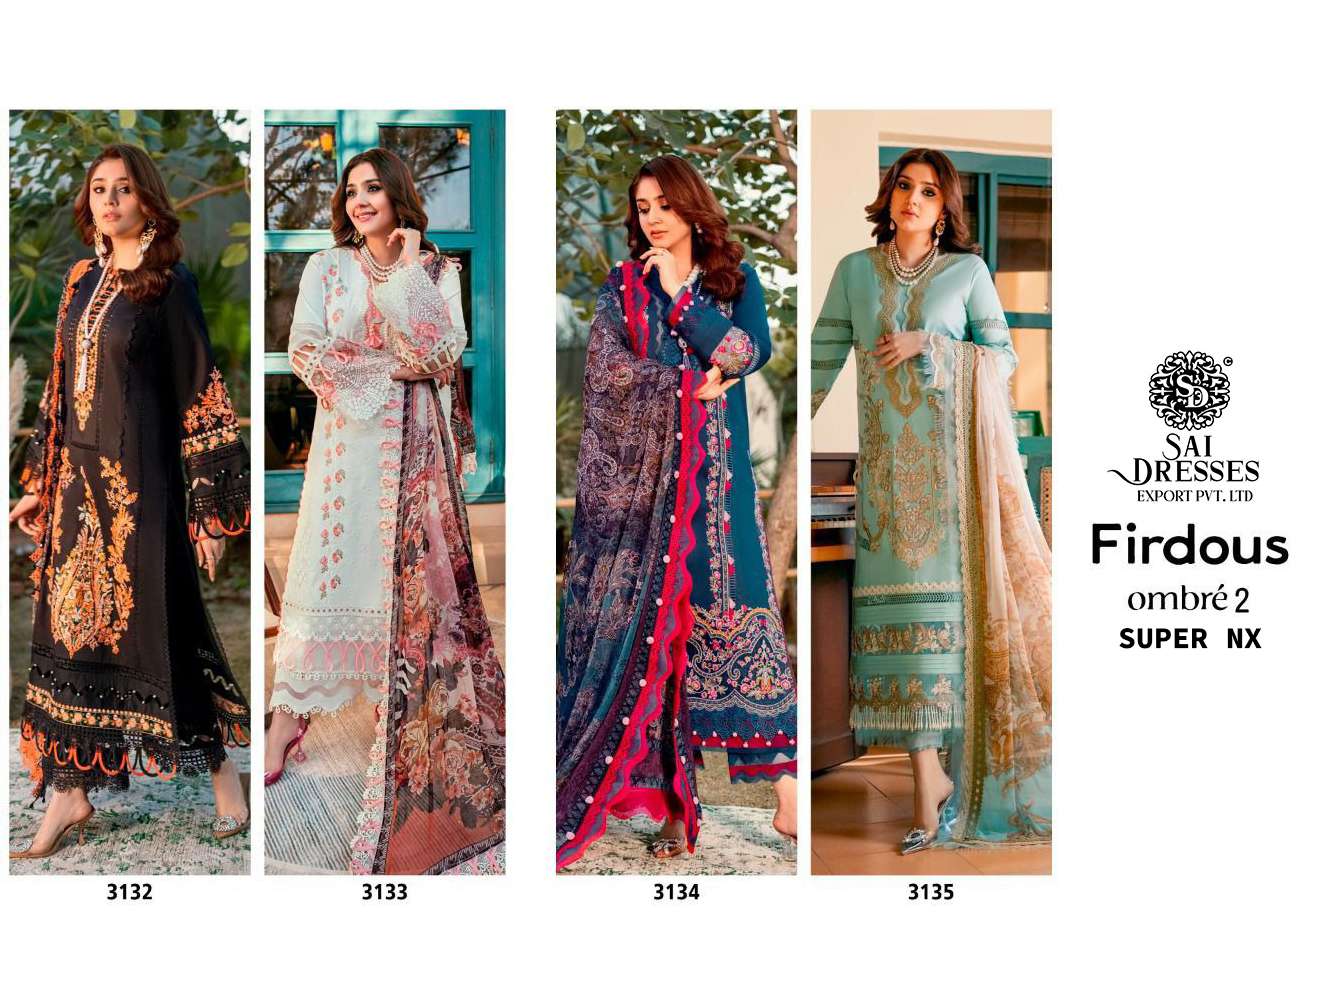 SAI DRESSES PRESENT FIRDOUS OMBRE VOL 2 SUPER NX SUMMER WEAR SELF EMBROIDERED FANCY PAKISTANI DESIGNER COLLECTION IN WHOLESALE RATE IN SURAT